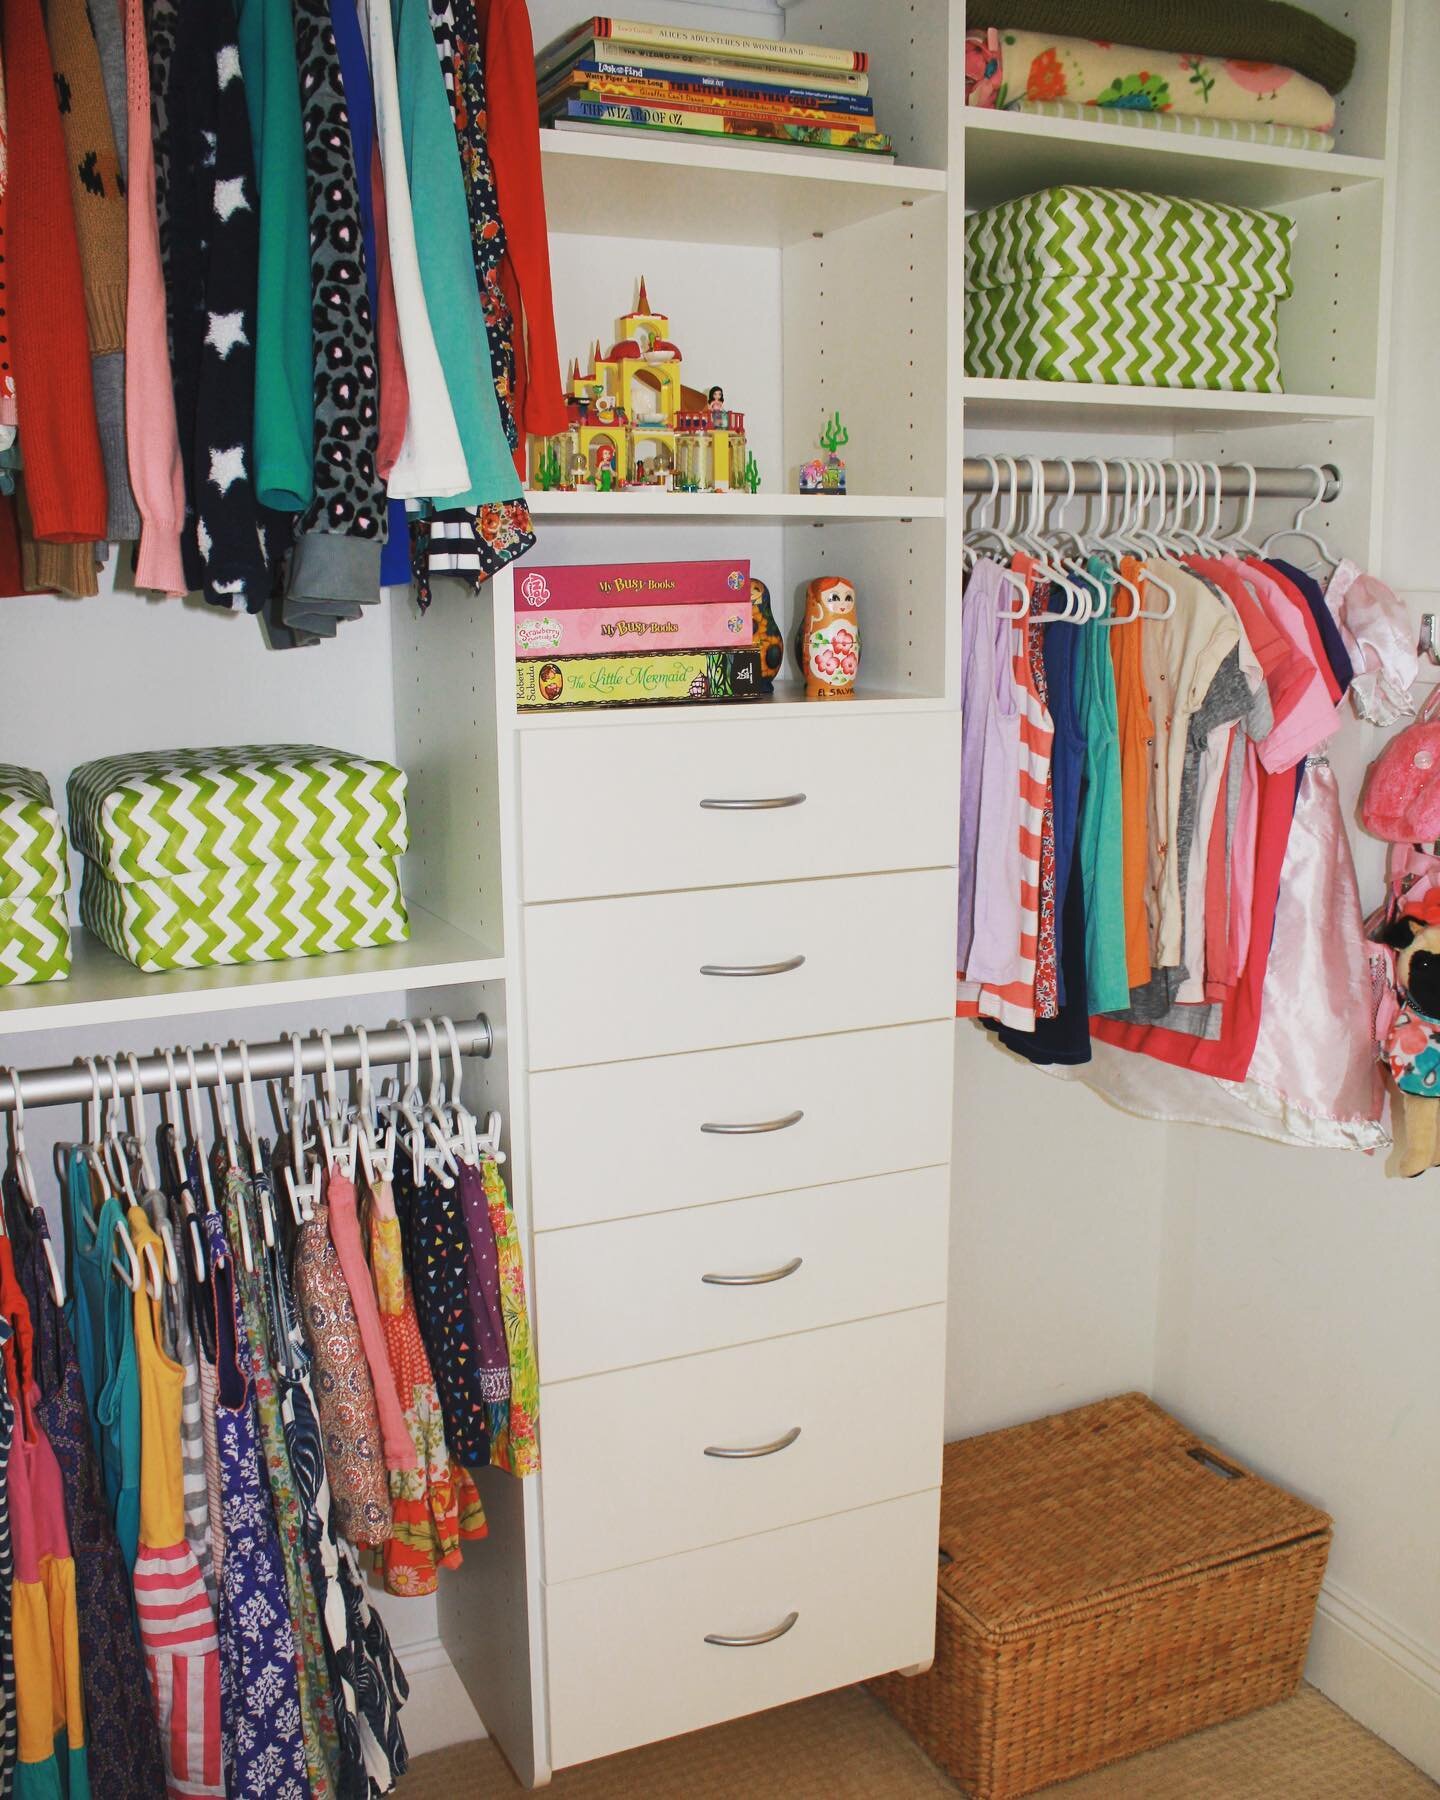 One of my favorite ways to get organized is to customize closet space. Ditch the simple shelf and hanging rod! There are so many better ways to maximize space. Here are a few companies that provide this service, at different price points:

1. Elfa (f